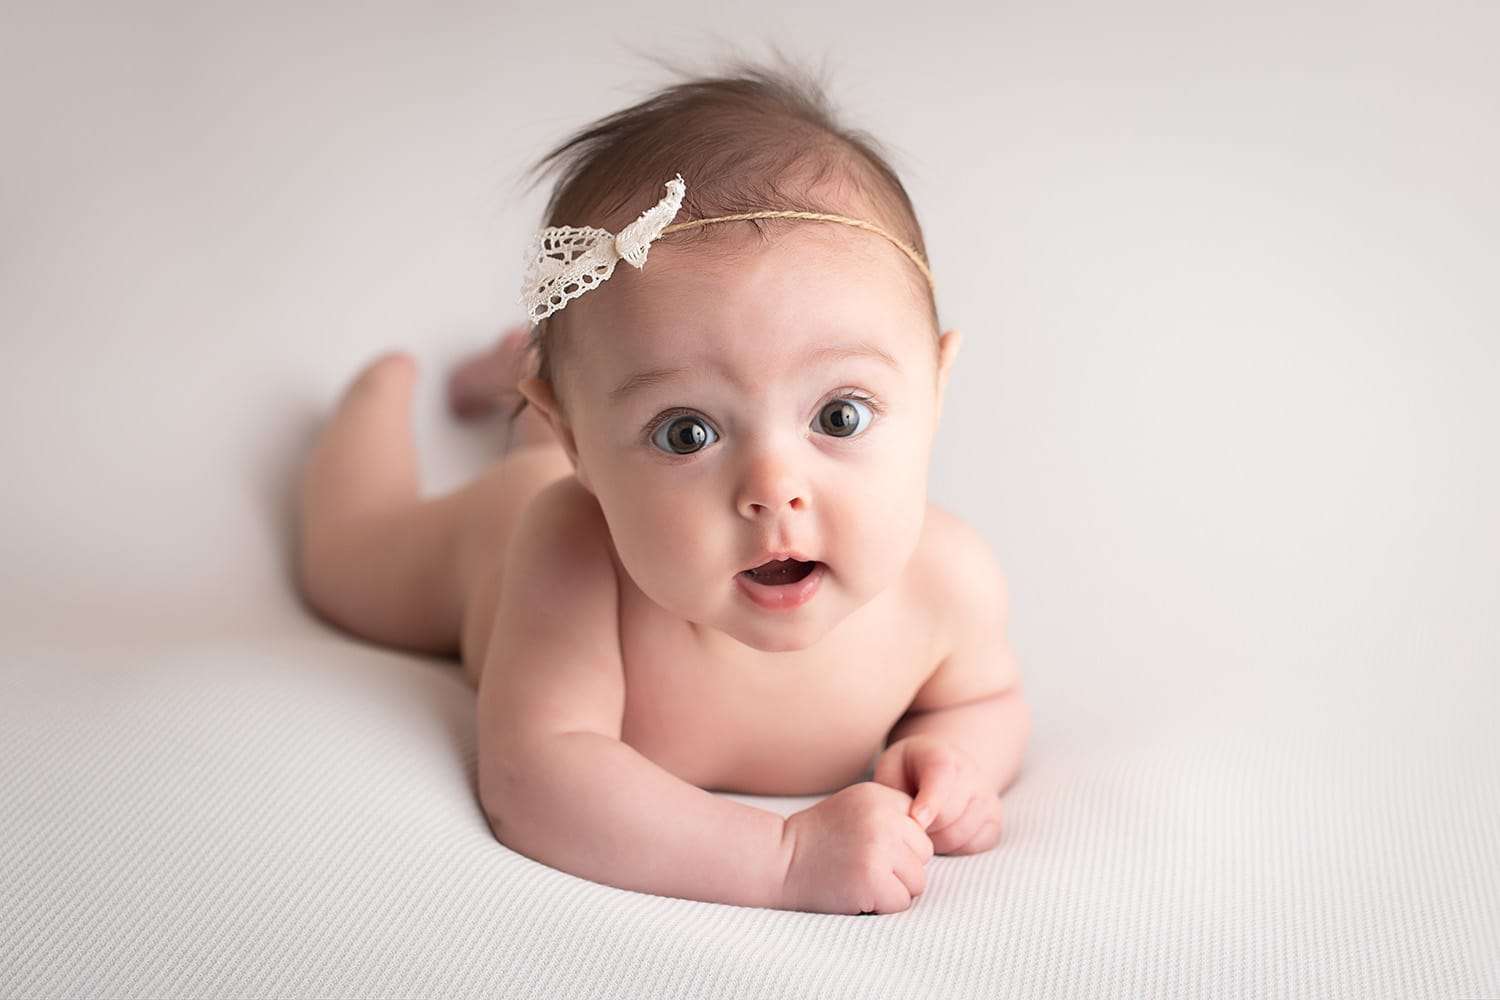 baby photographer in rochester ny captures baby's first year from newborn photography to cake smash